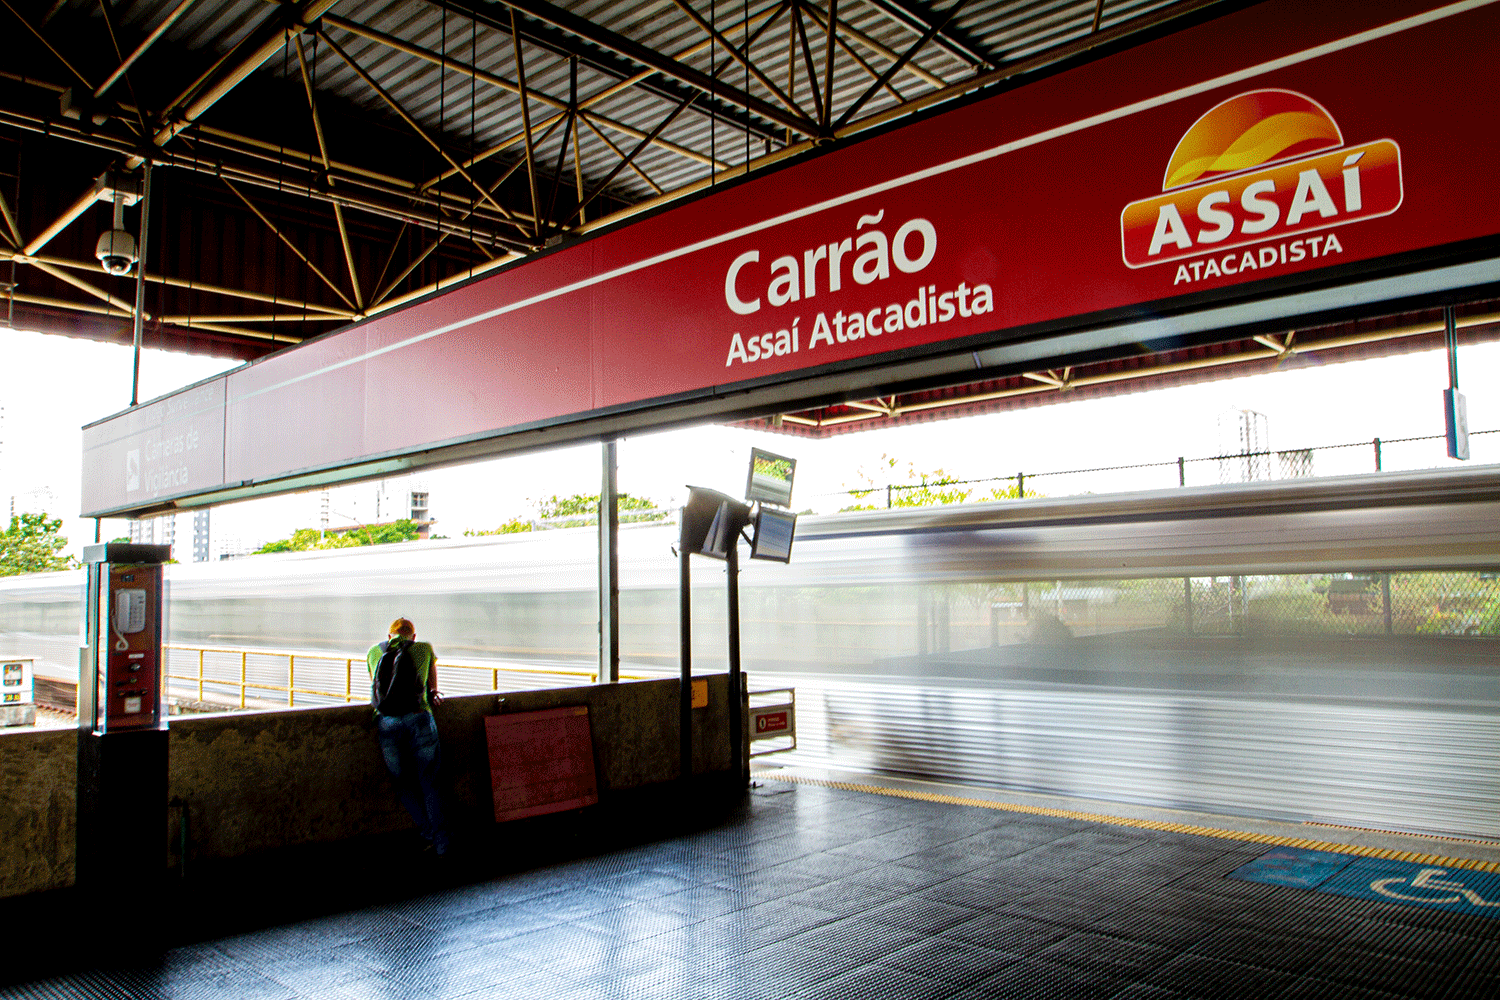 Bras Station integrated train station and metro station, Sao Paulo